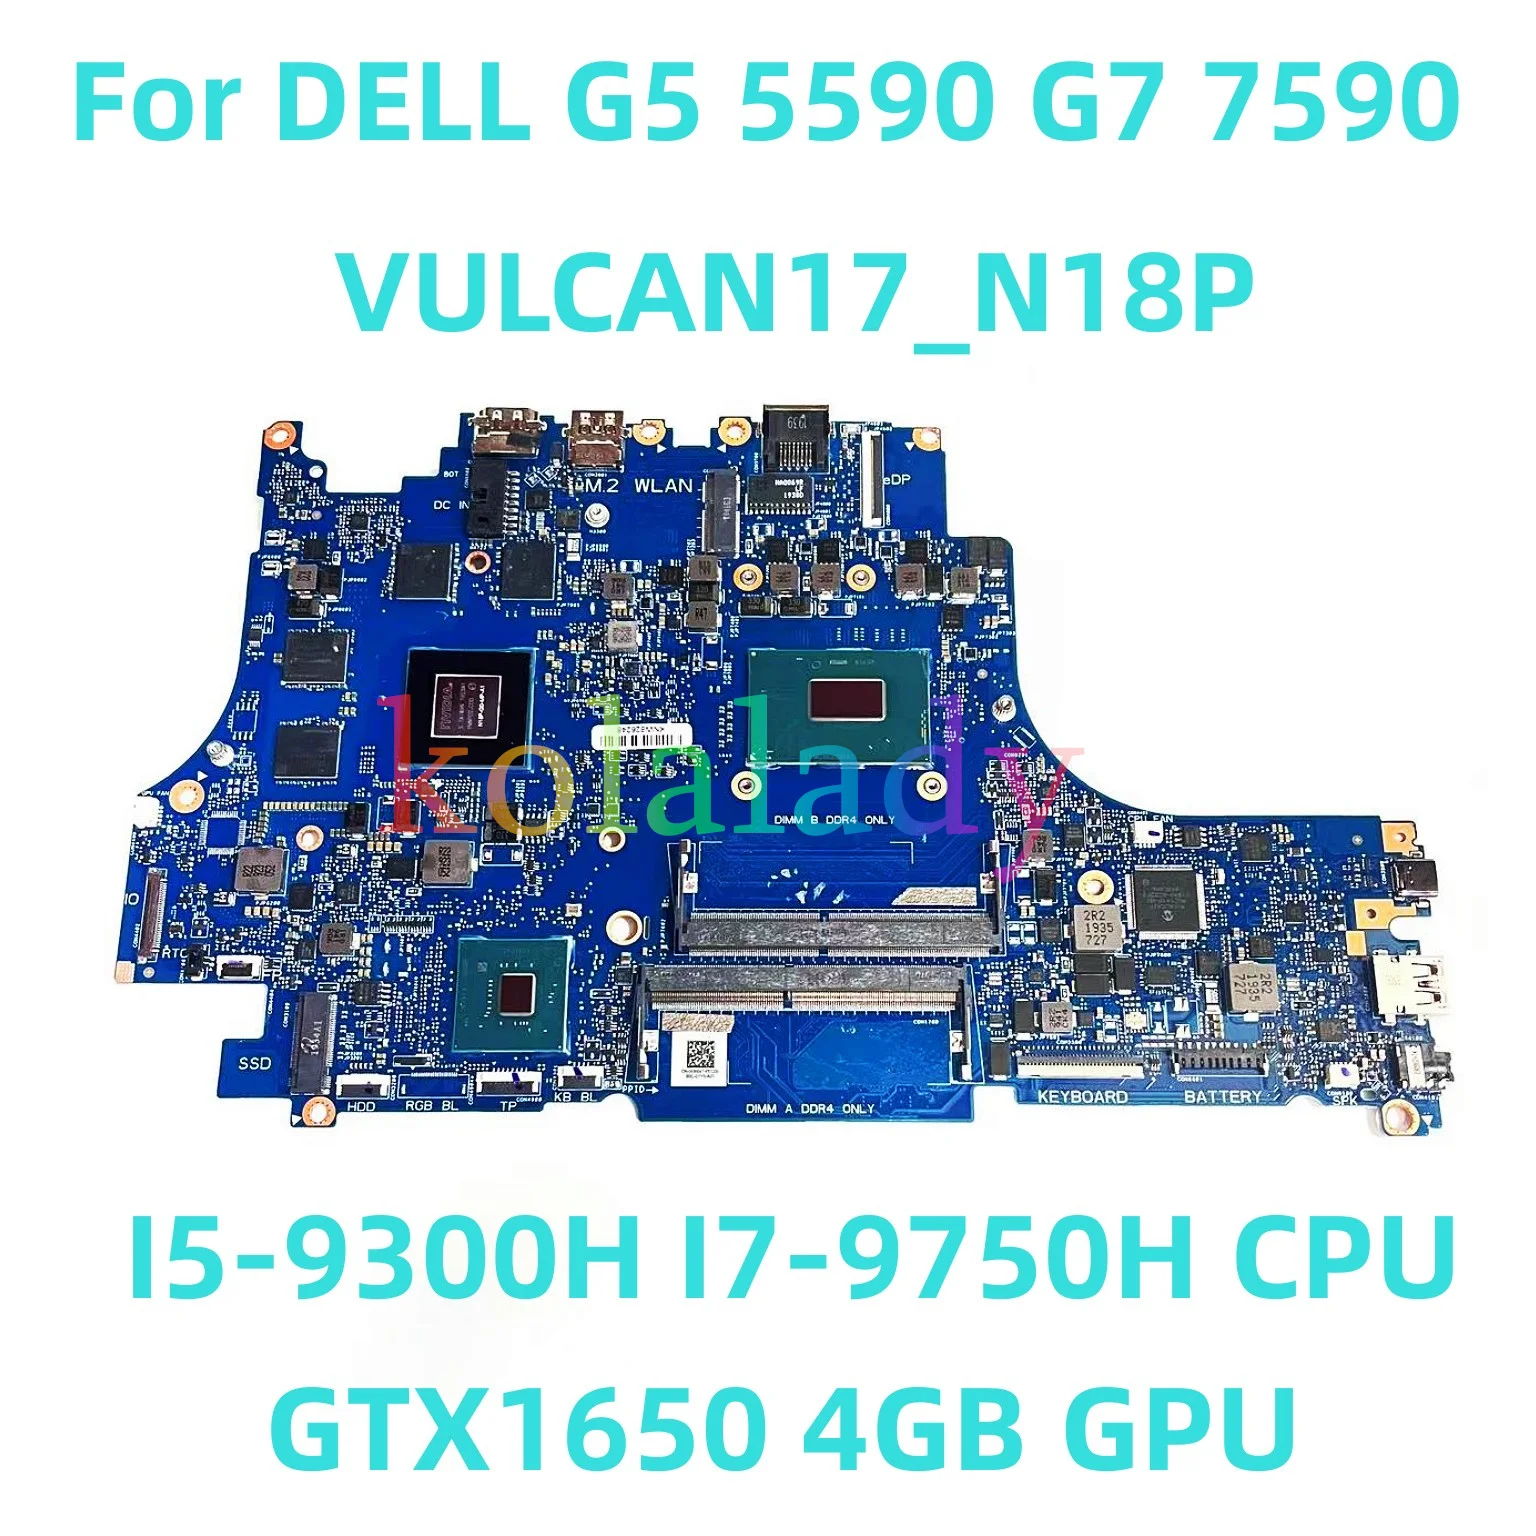 

For DELL G5 5590 G7 7590 Laptop motherboard VULCAN17_ N18P with I5-9300H I7-9750H CPU GTX1650 4GB GPU 100% Tested Fully Work